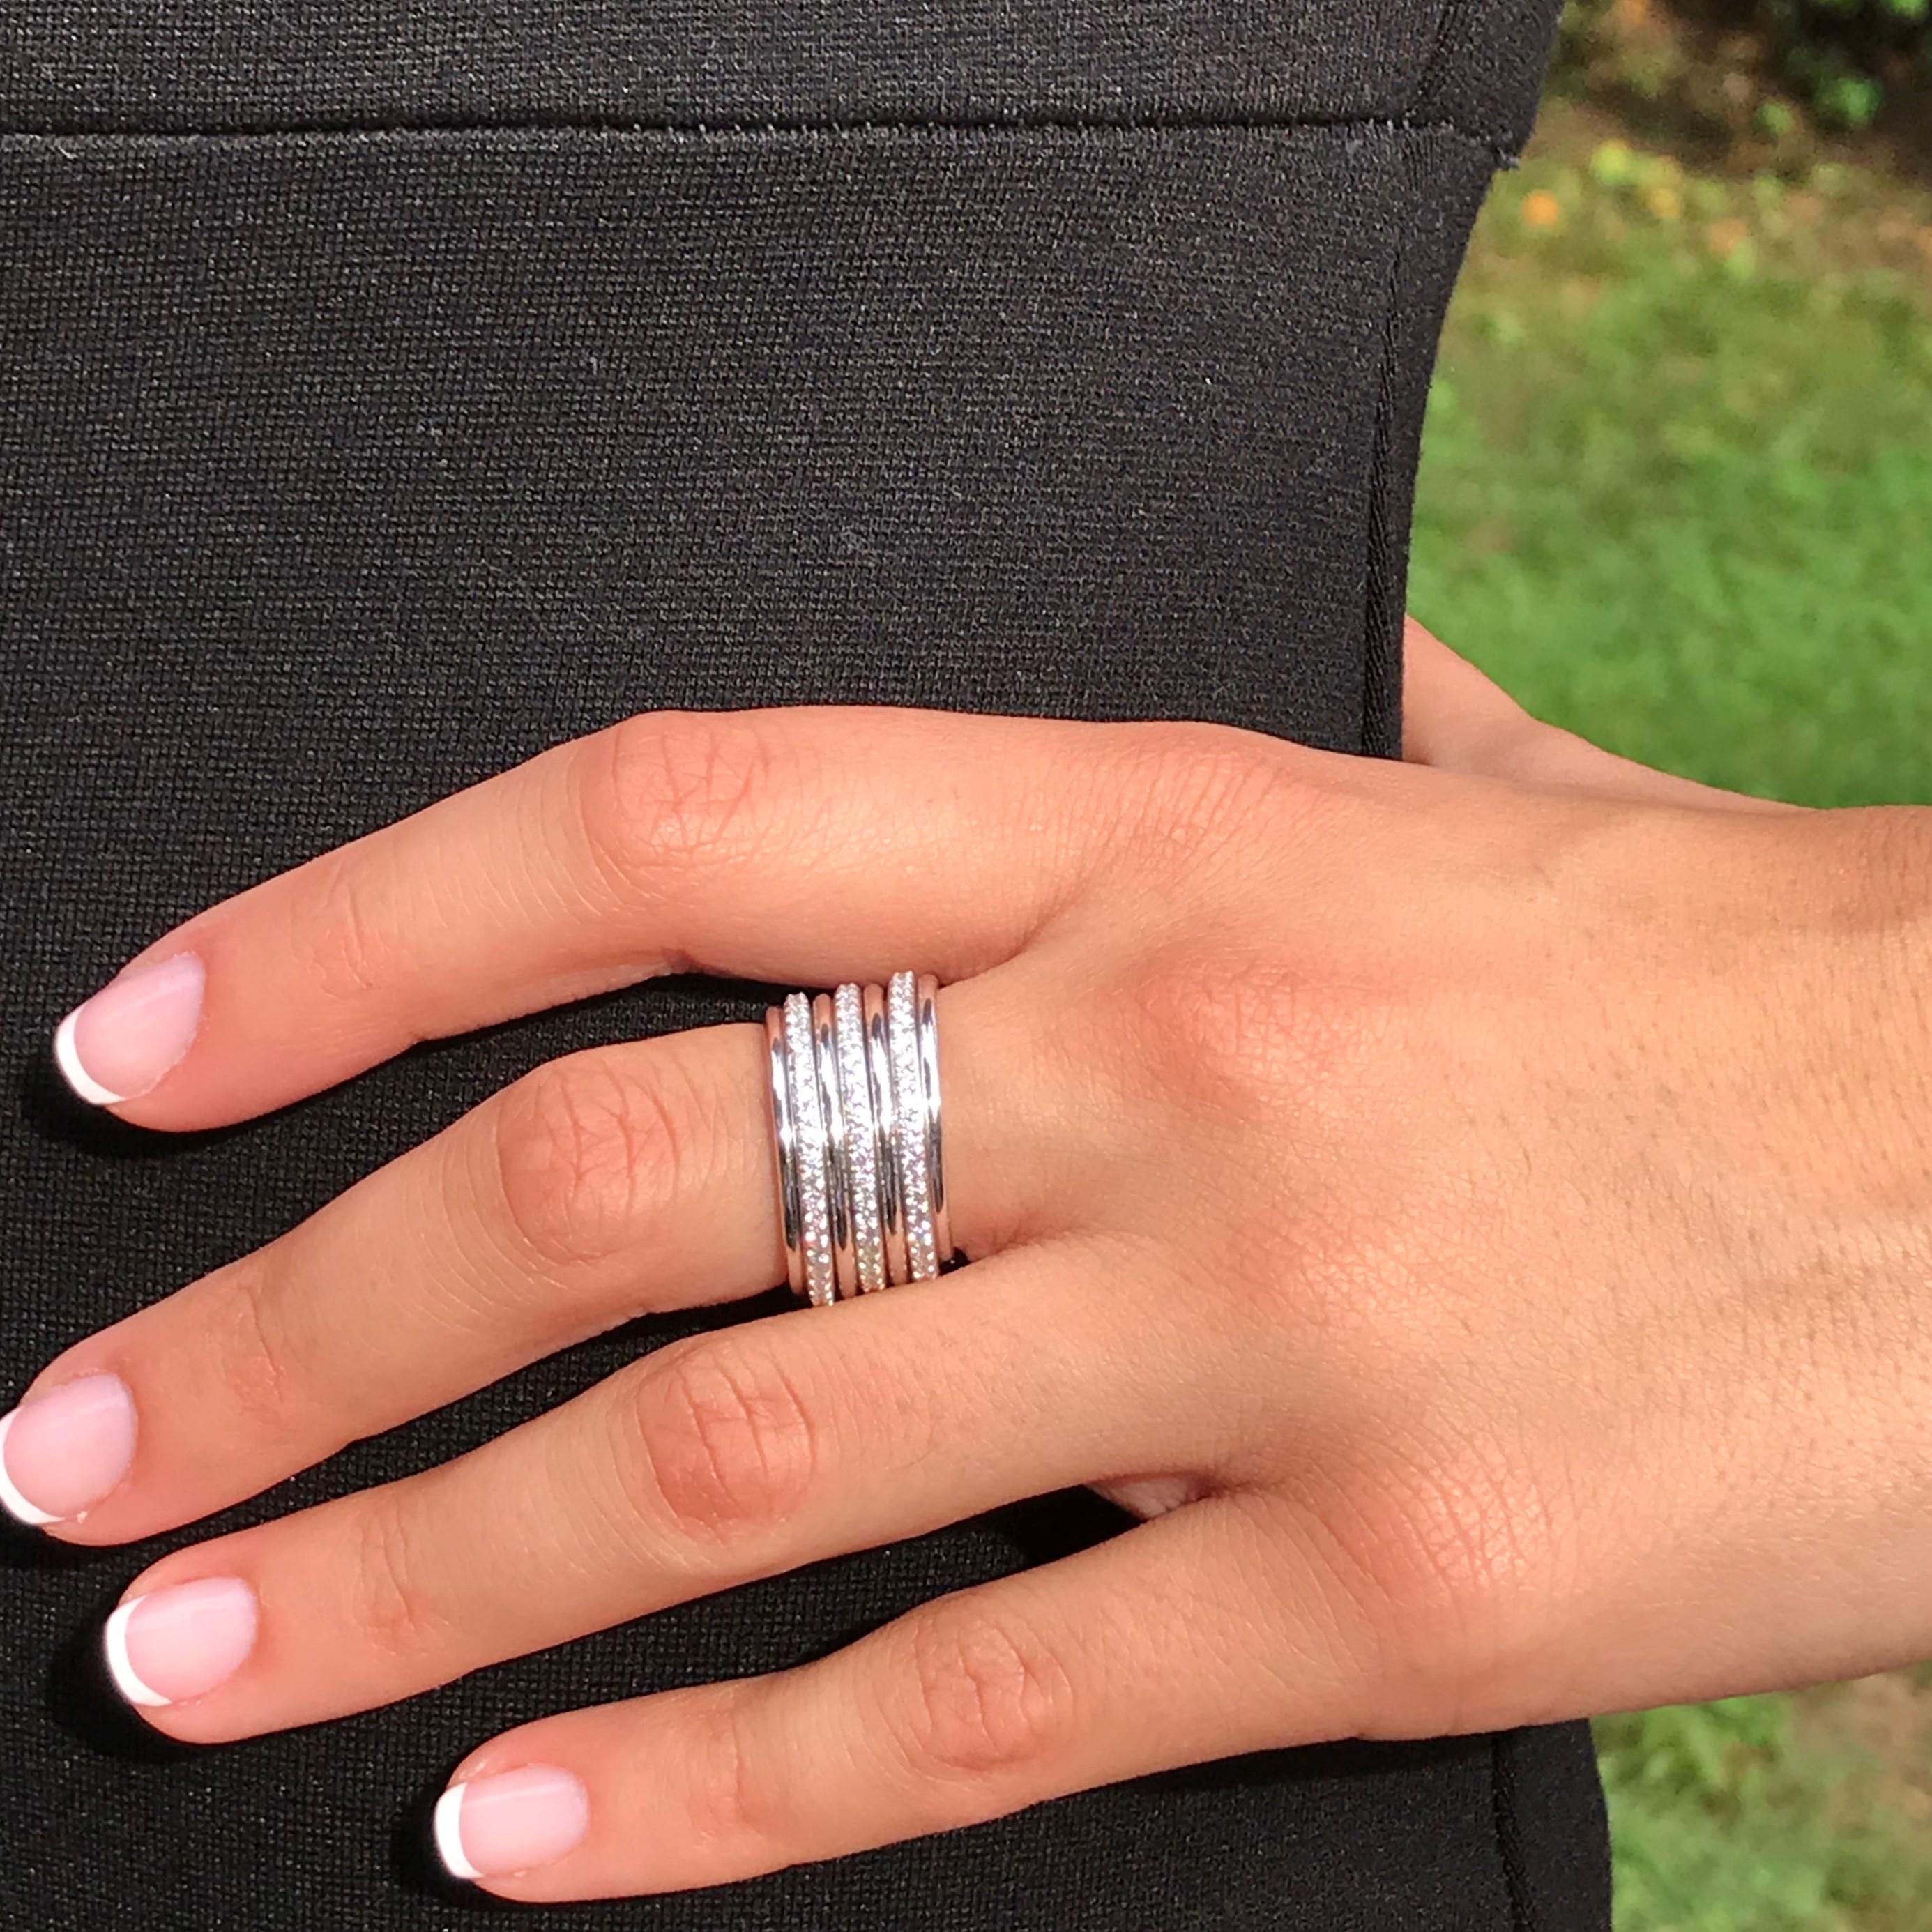 Our Italian designer have created this unique look with white gold and diamond multilayer band ring , all link together to achieve a special effect. The clean lines create a look of timeless radiance, a pure feminine style for that special unique